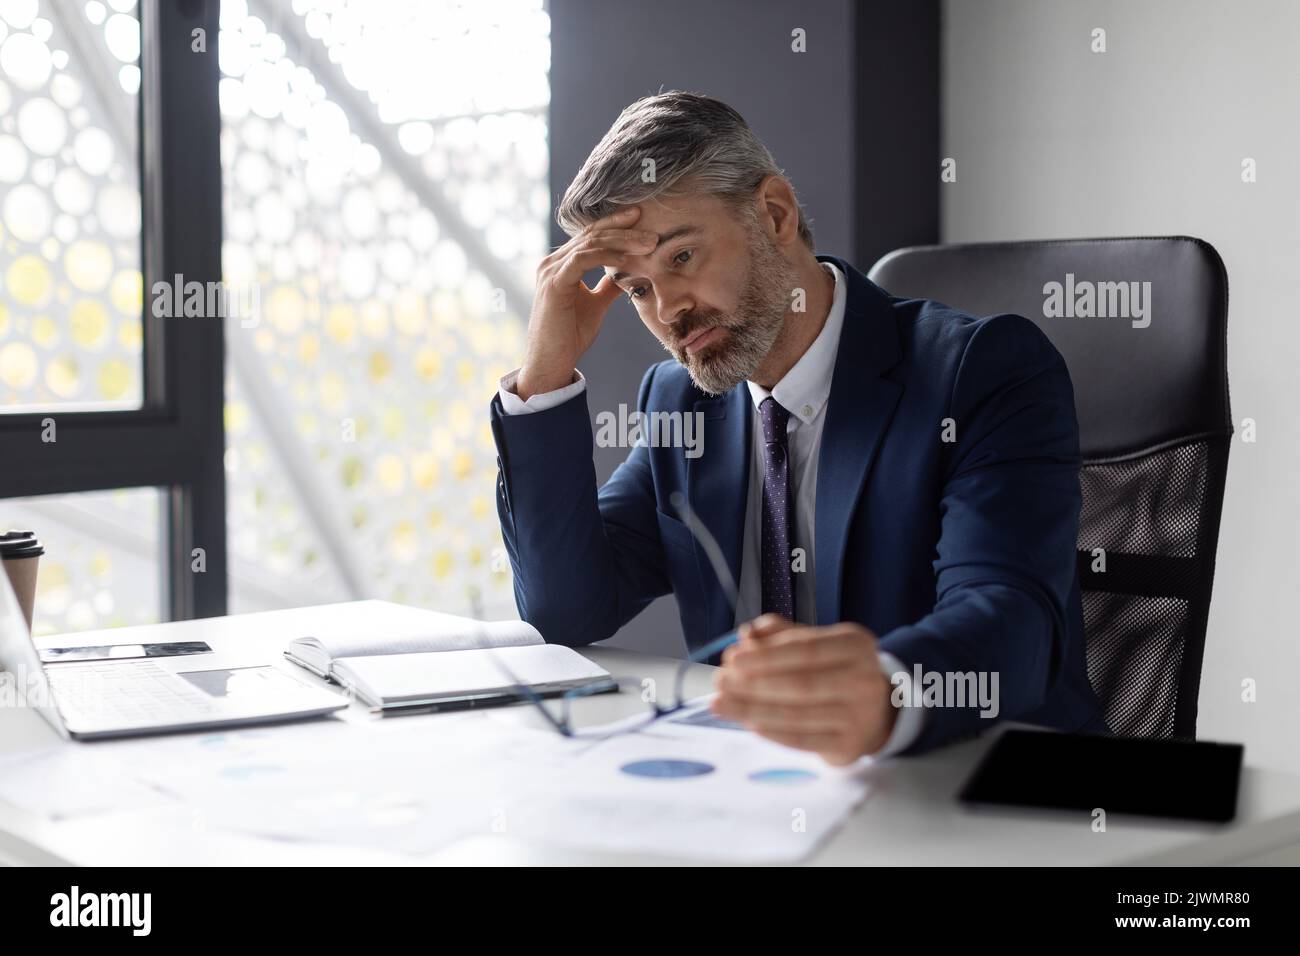 Entrepreneurship Crisis. Depressed Middle Aged Businessman Sitting At Workplace In Office Stock Photo